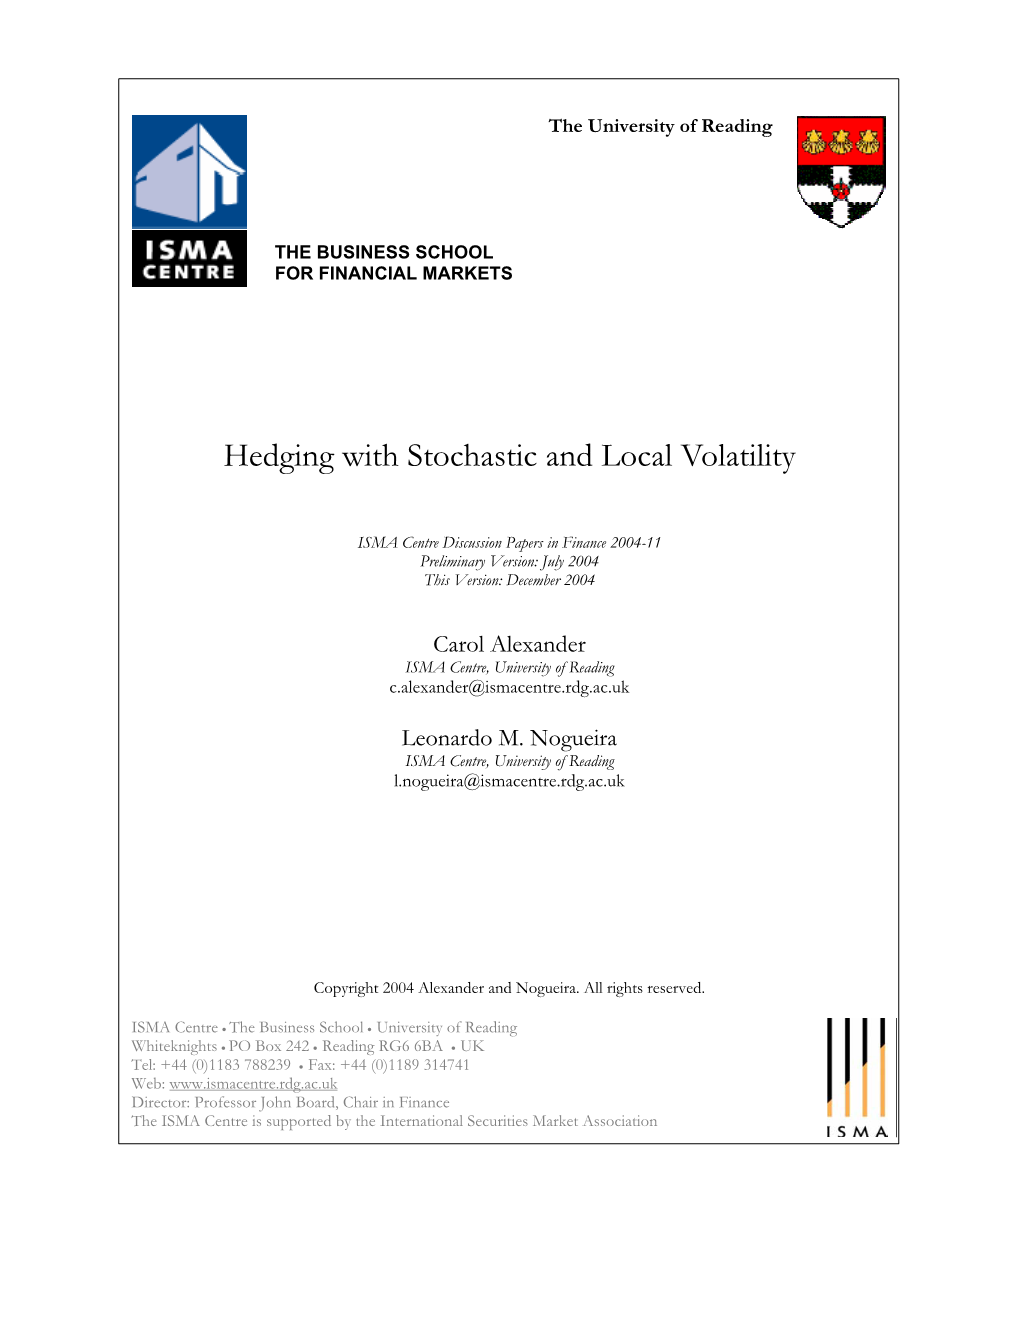 Hedging with Stochastic and Local Volatility